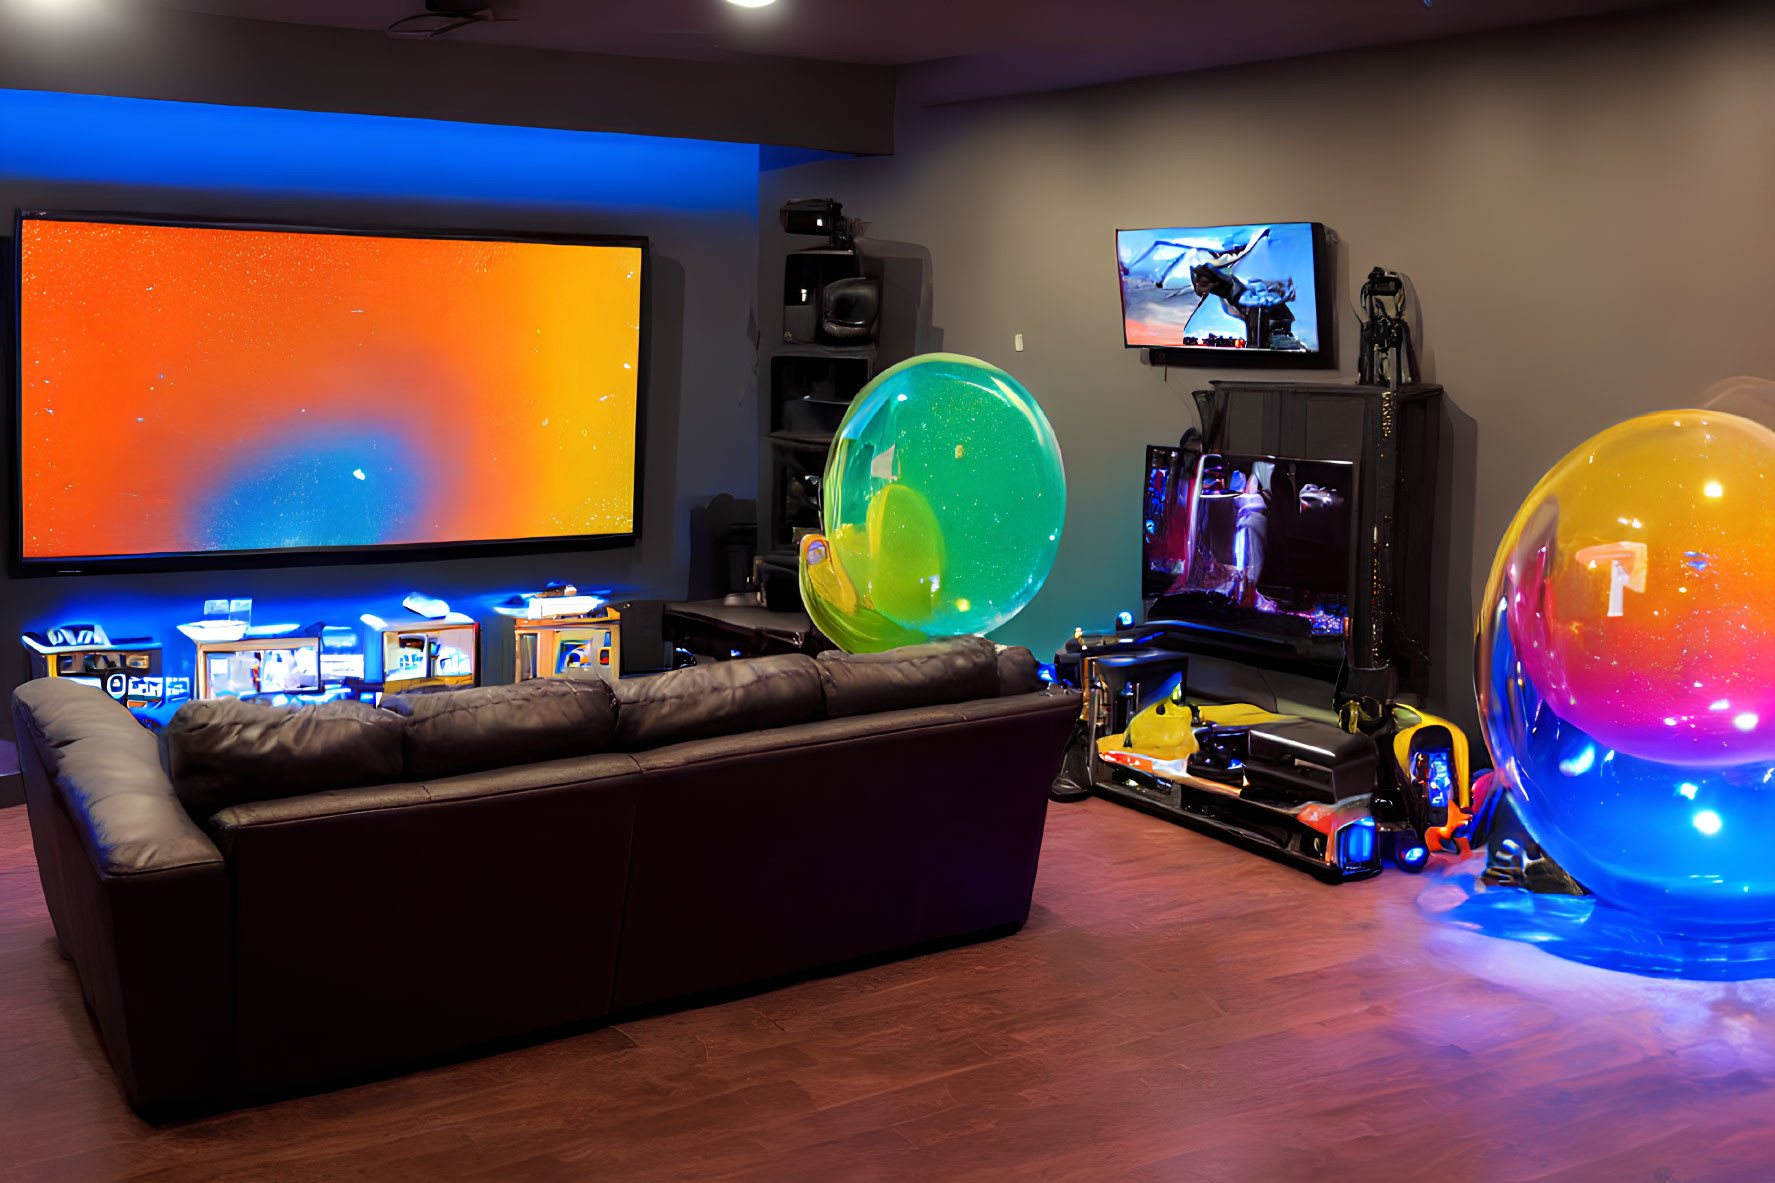 Spacious home entertainment room with large TV, colorful lighting, gaming setup, and unique balloon decor